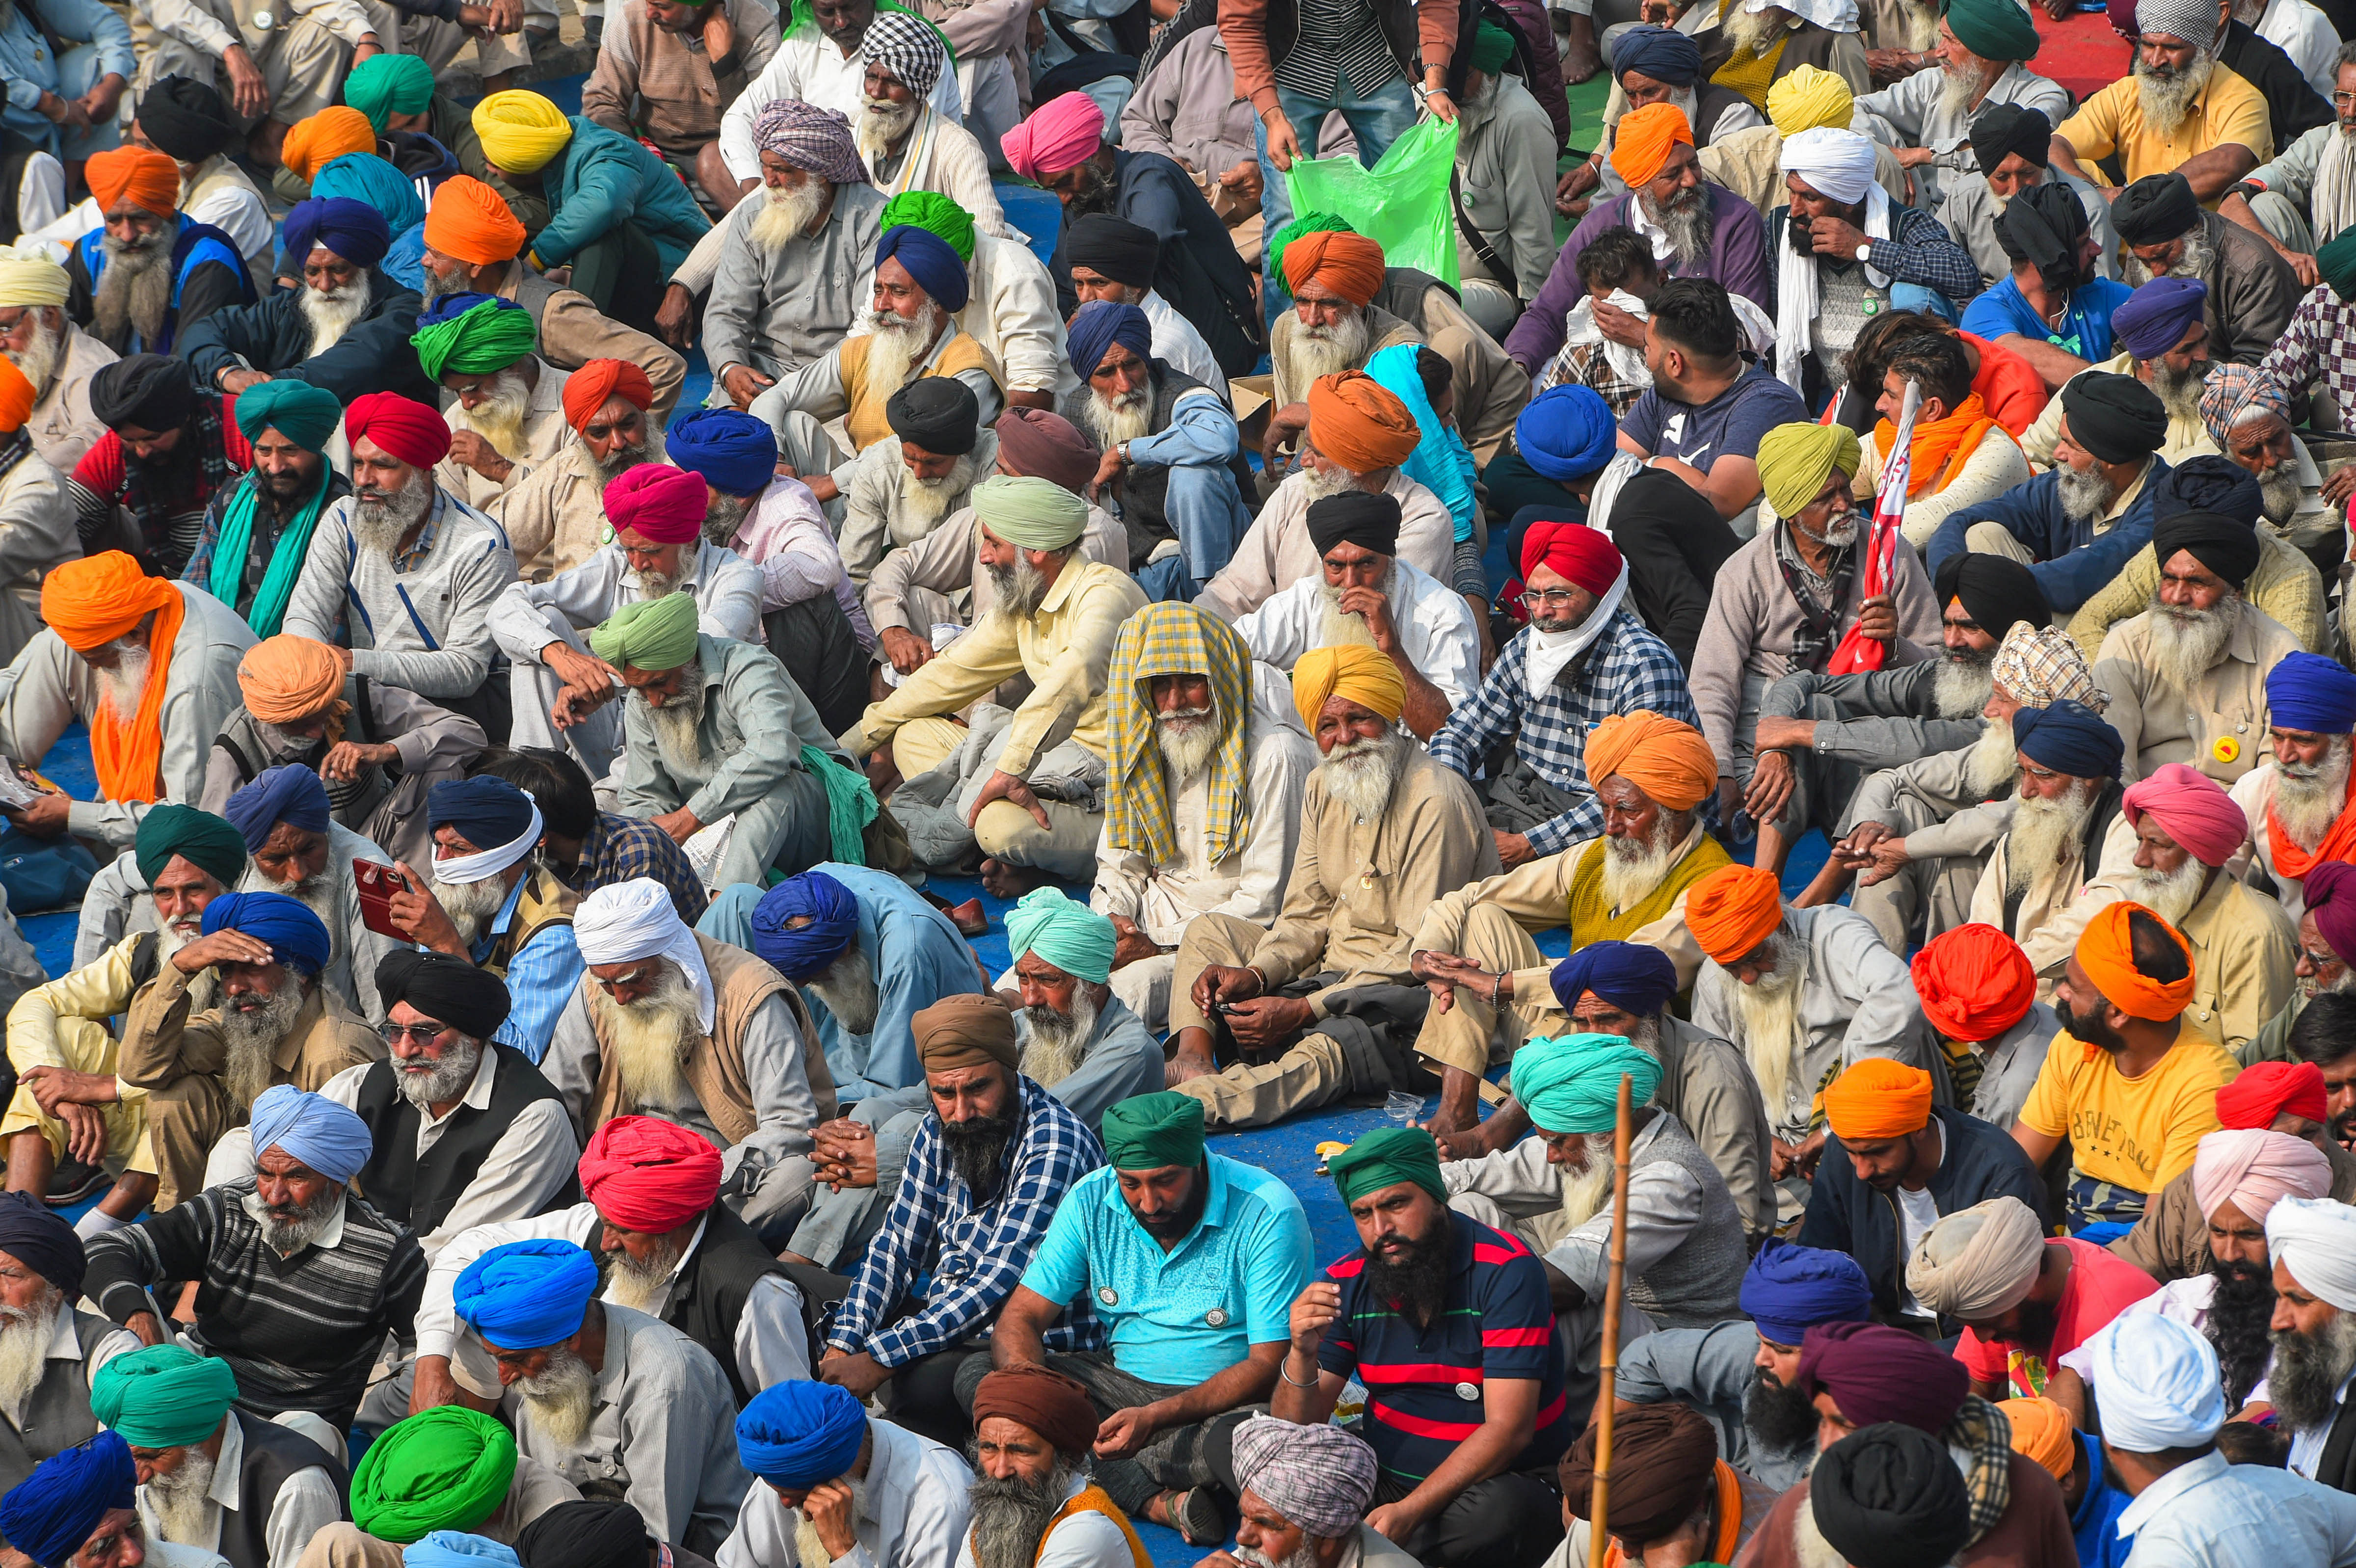 Farmers during their agitation against the Center's new farm laws, at Singhu border in New Delhi, Monday, Dec. 7, 2020. Credit: PTI Photo